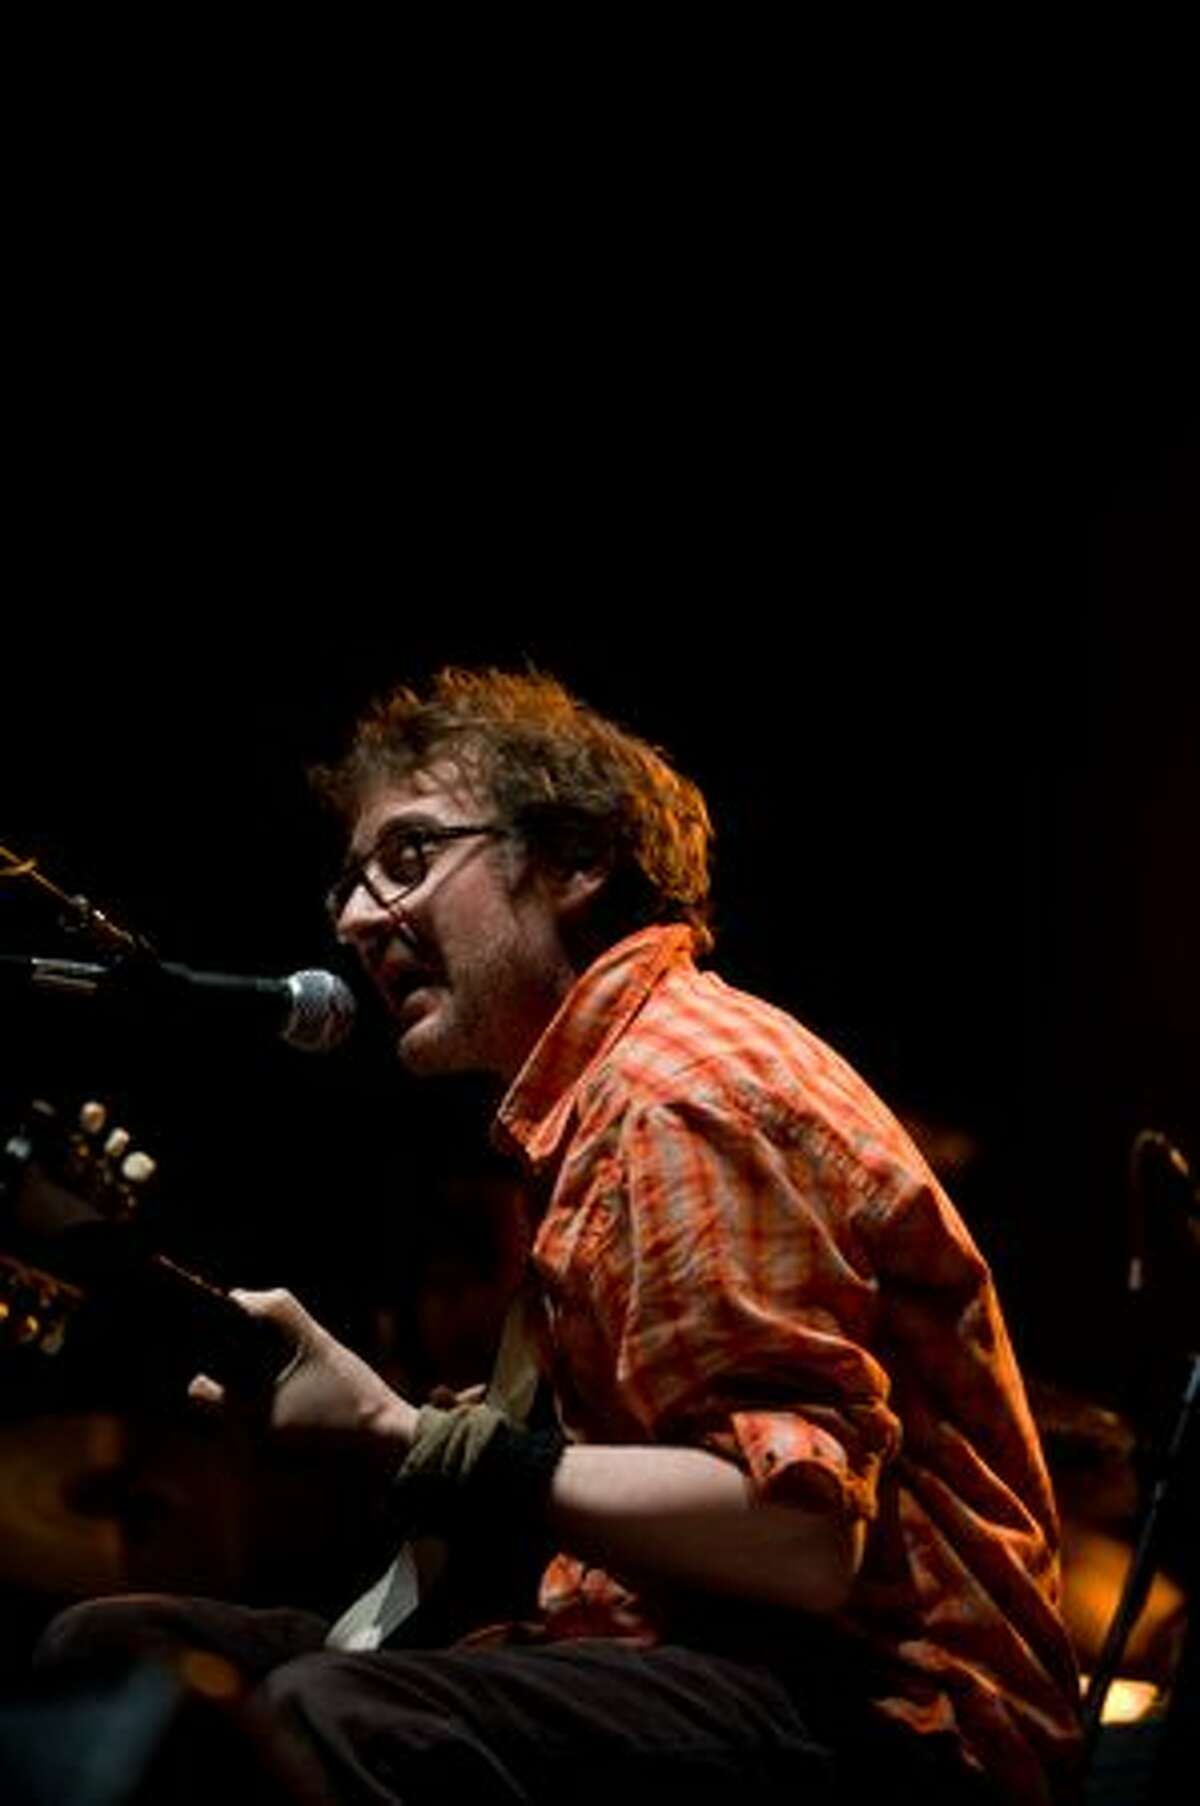 Califone performs on stage at the Paramount Theatre opening for Wilco on Feb. 6, 2010. (Chona Kasinger/seattlepi.com)